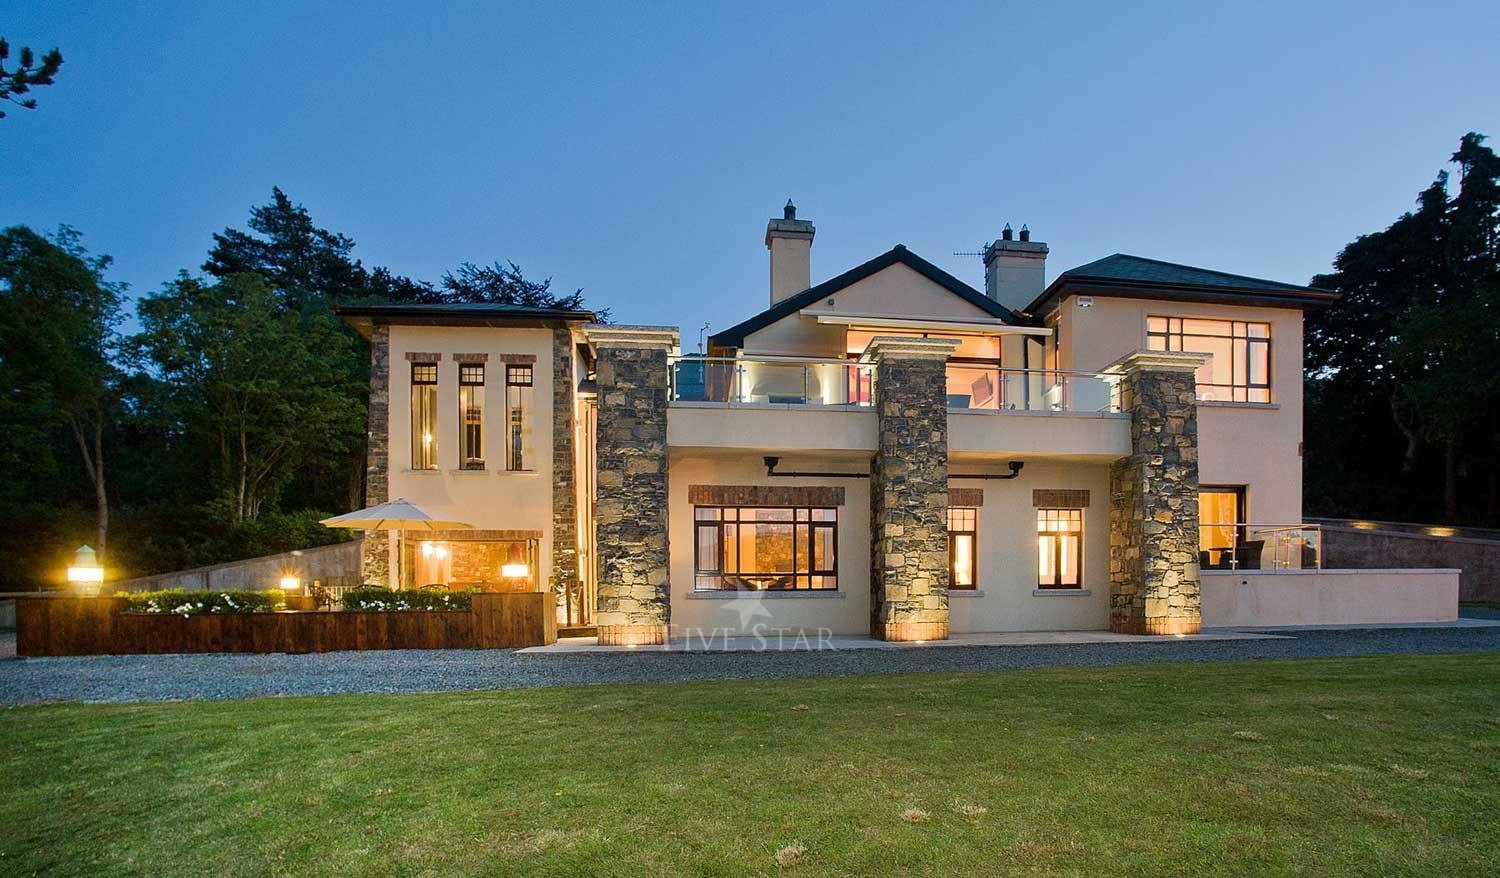 #9 Starboard House: Carlingford Bay, Louth (5 Bedrooms)